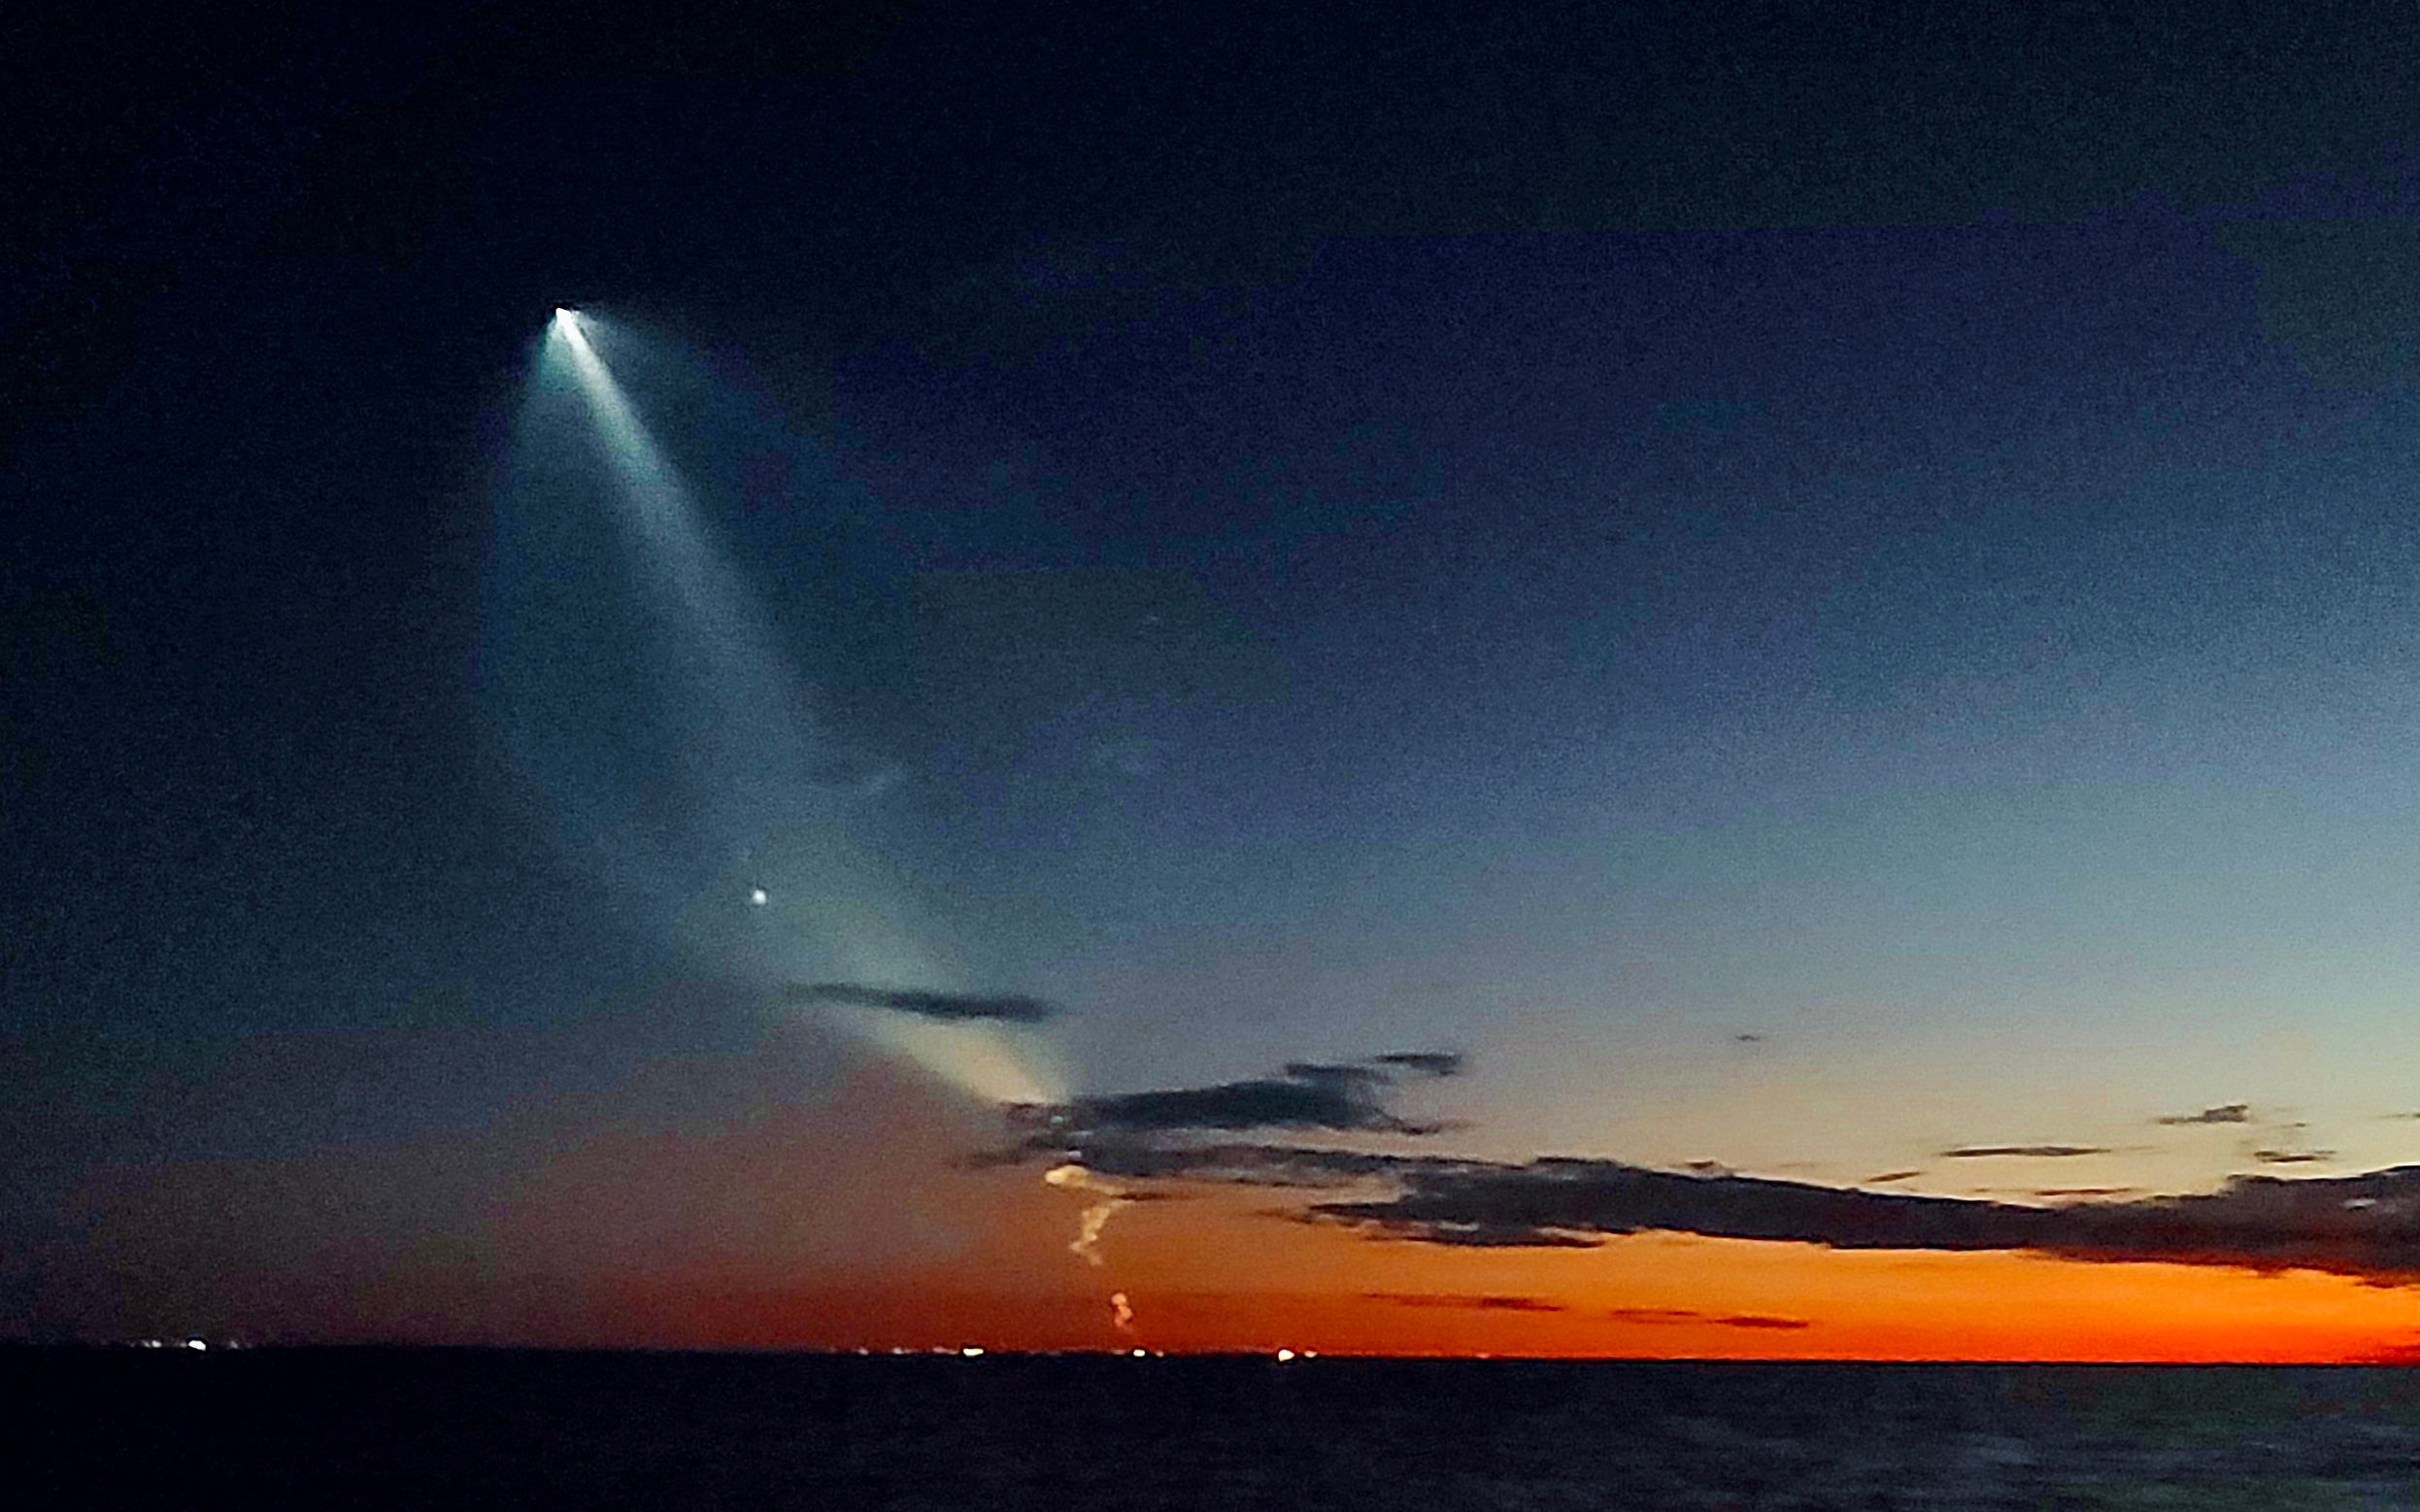 Space X Launch over Hatteras Island